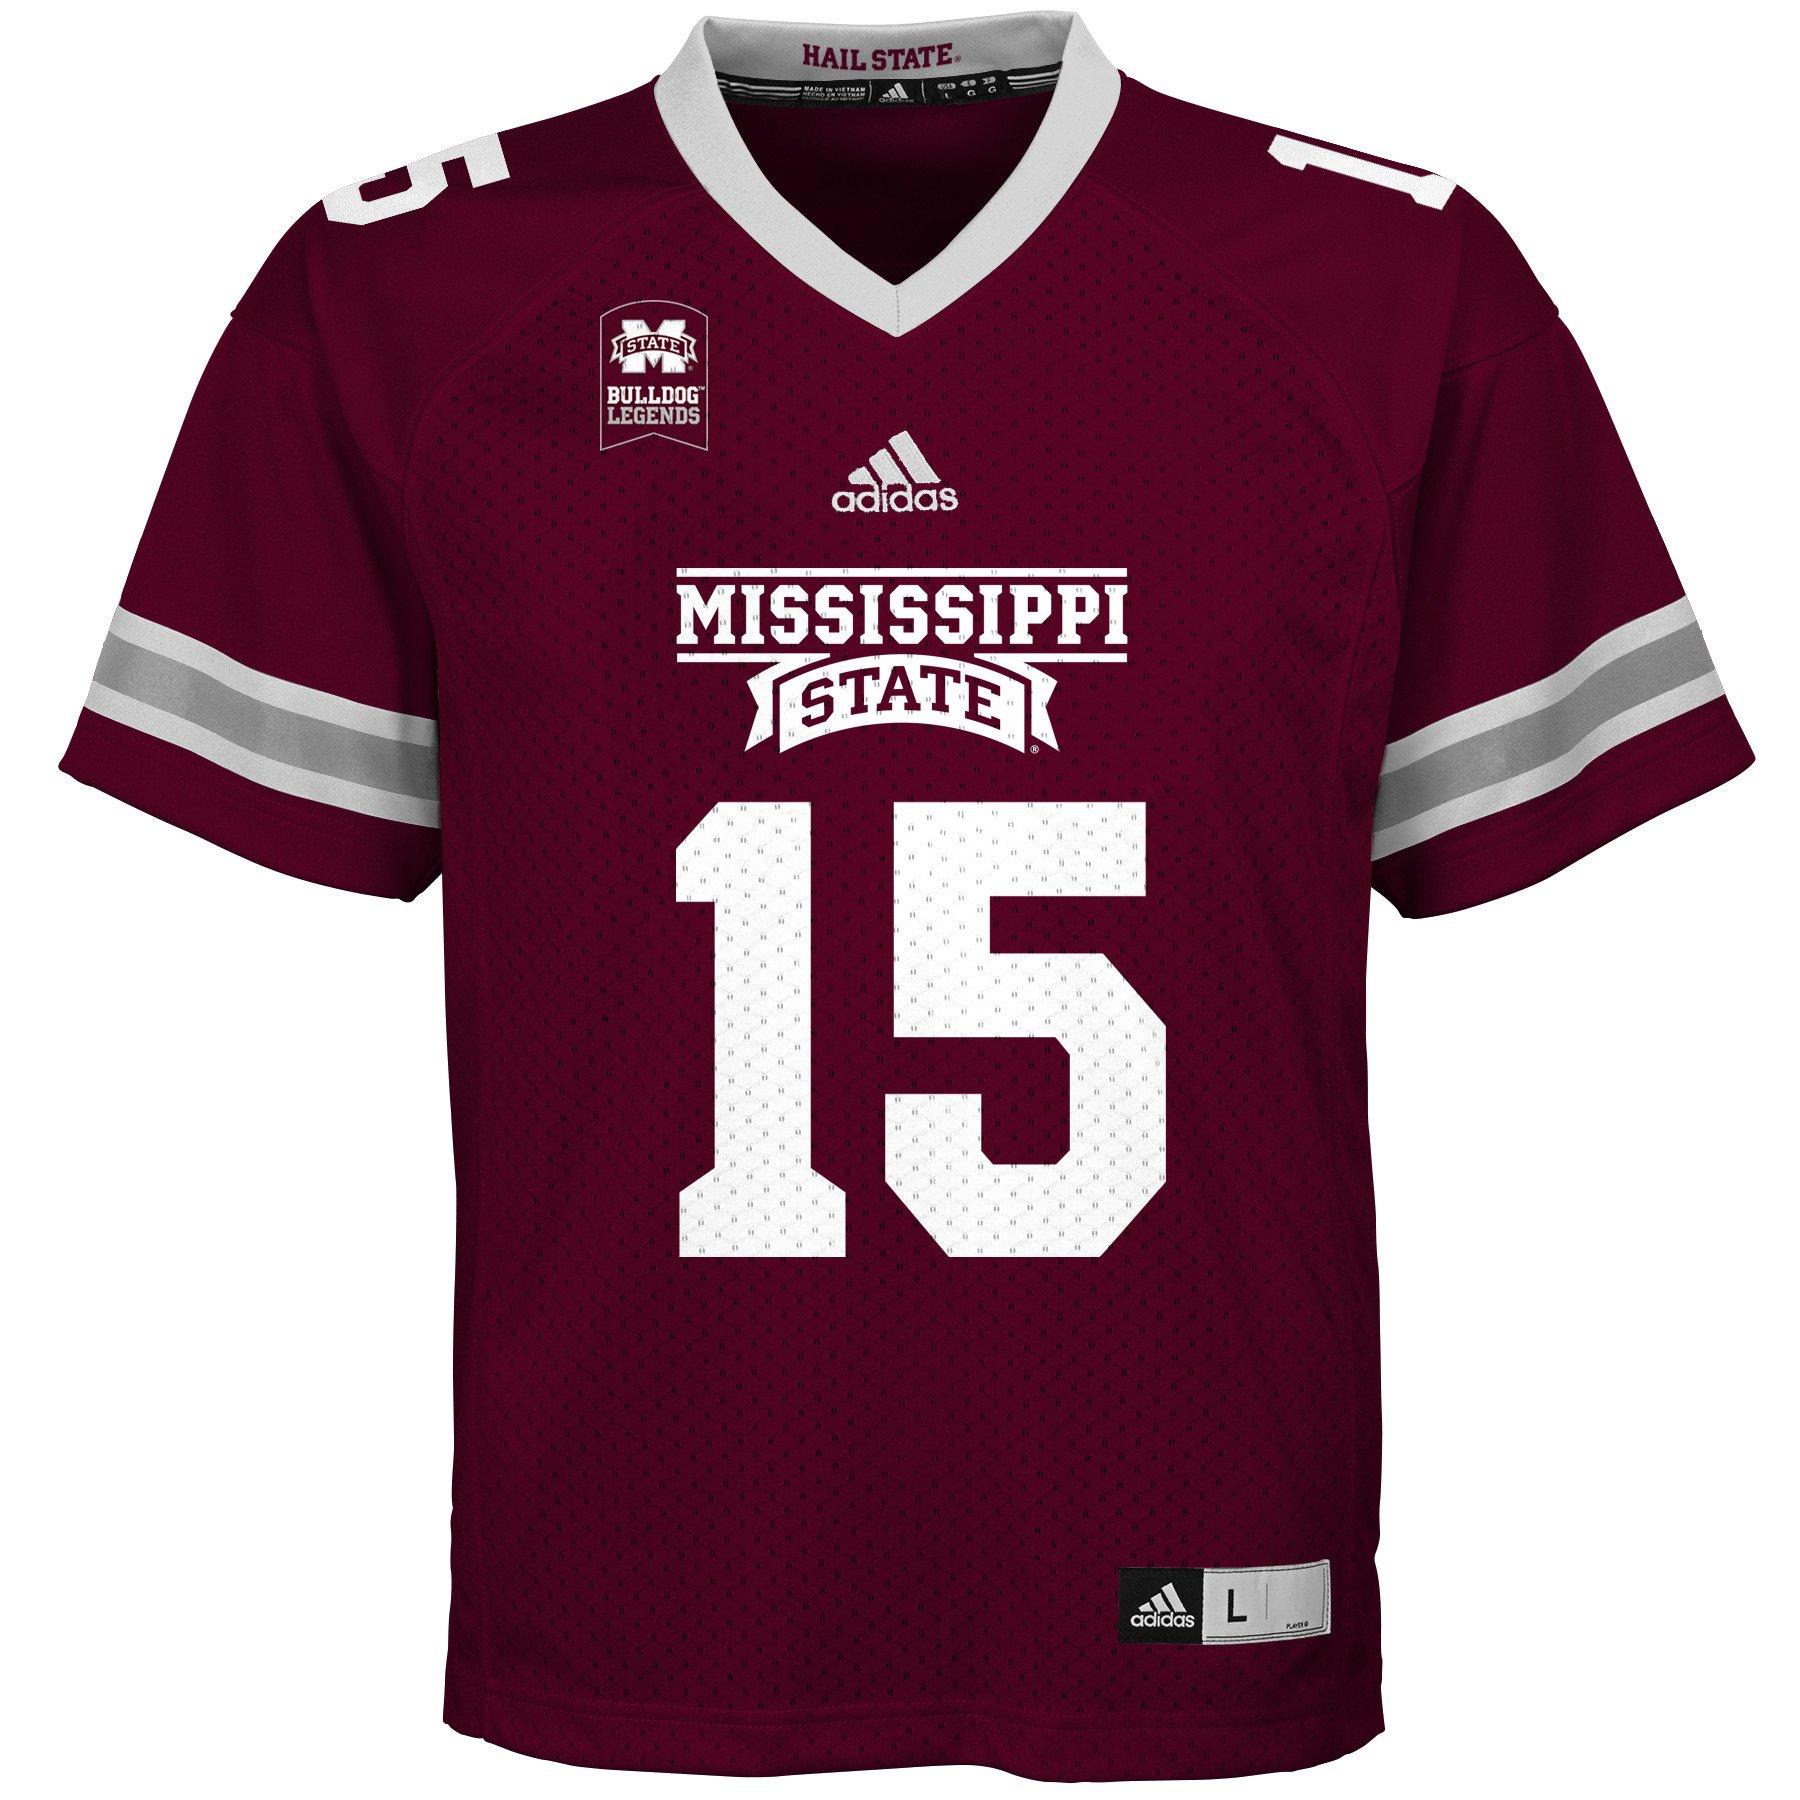 mississippi state jersey